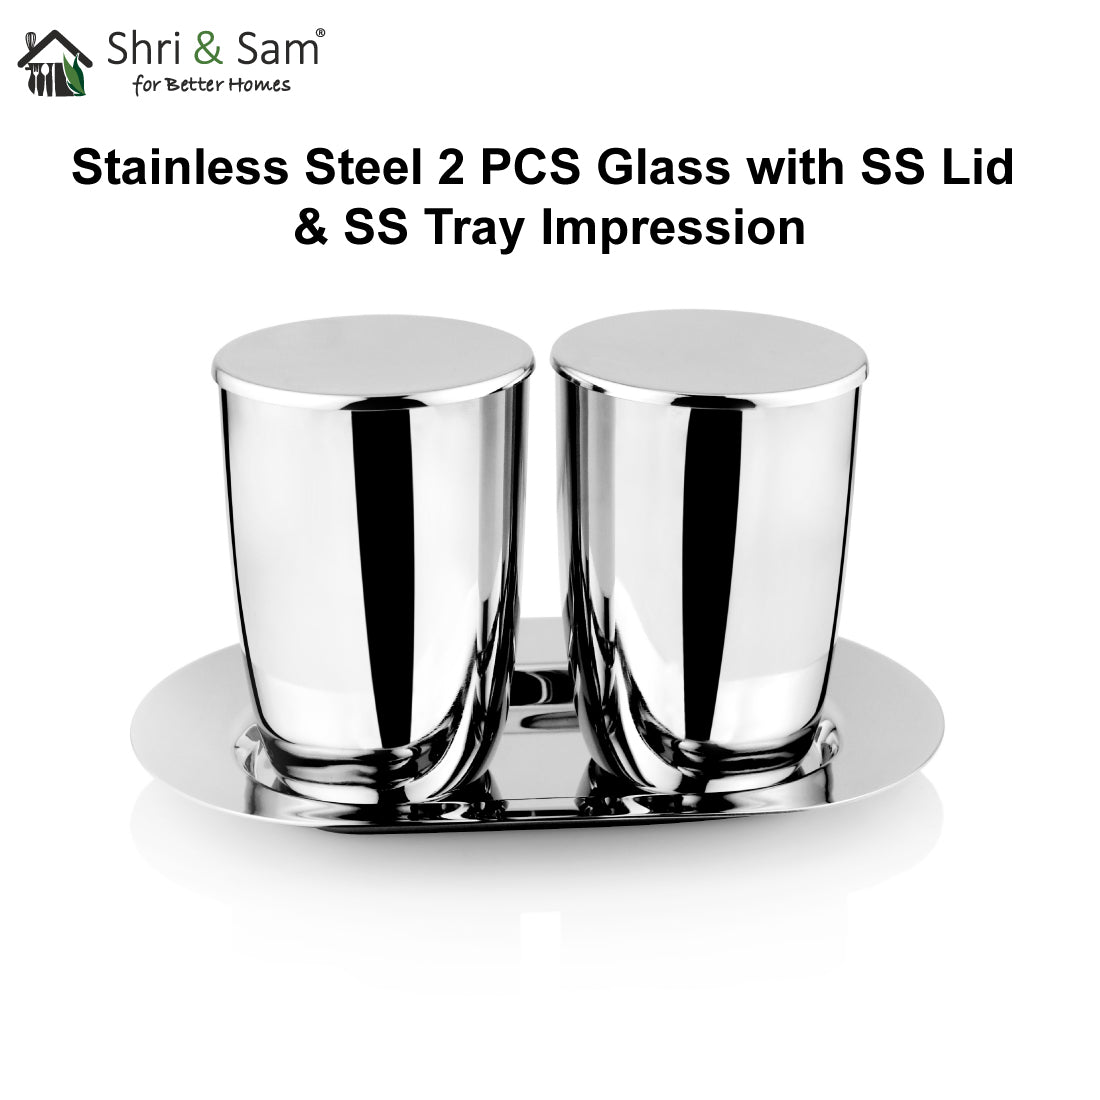 Stainless Steel 2 PCS Glass with SS Lid & SS Tray Impression